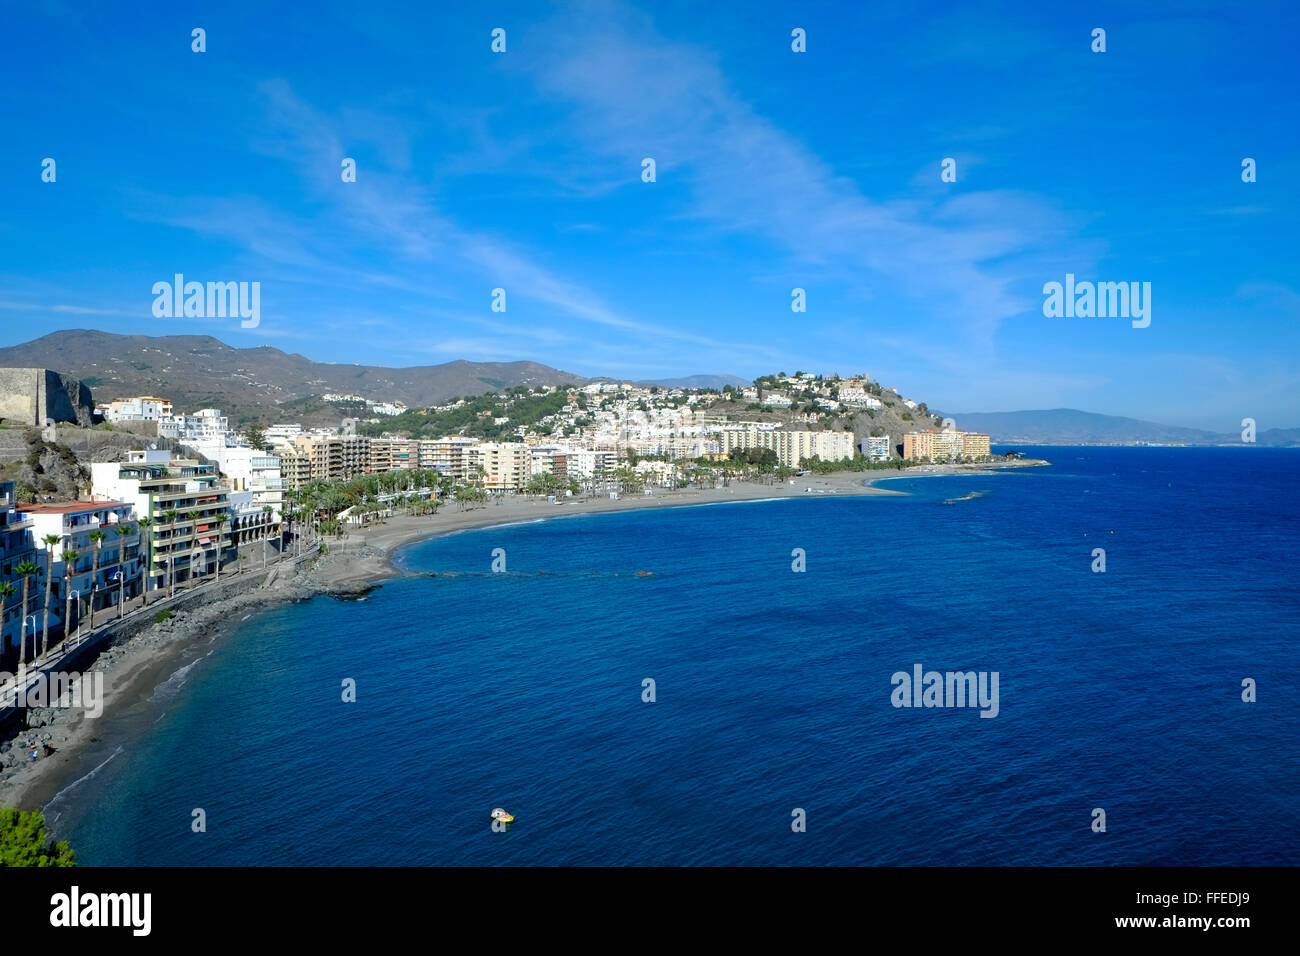 The beachfront with low rise buildings and cerulean blue Mediterranean sea on a sunny late autumn day at Almuñécar, Costa Tropical, Andalucia. Spain Stock Photo